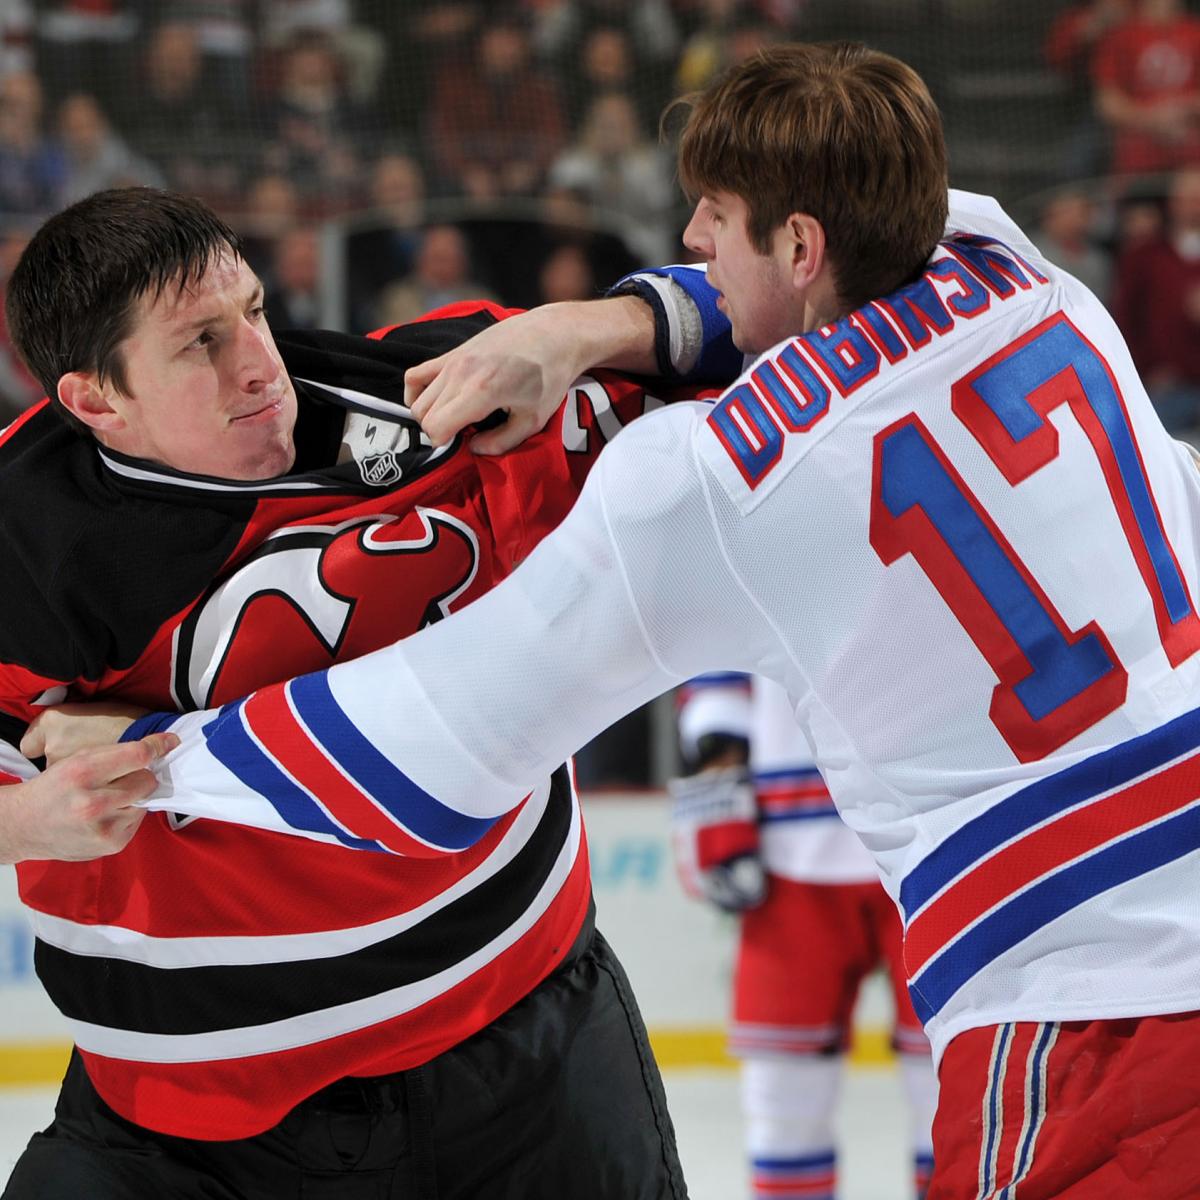 The Puck Drop Line Brawl: Looking back at the Devils-Rangers Fight